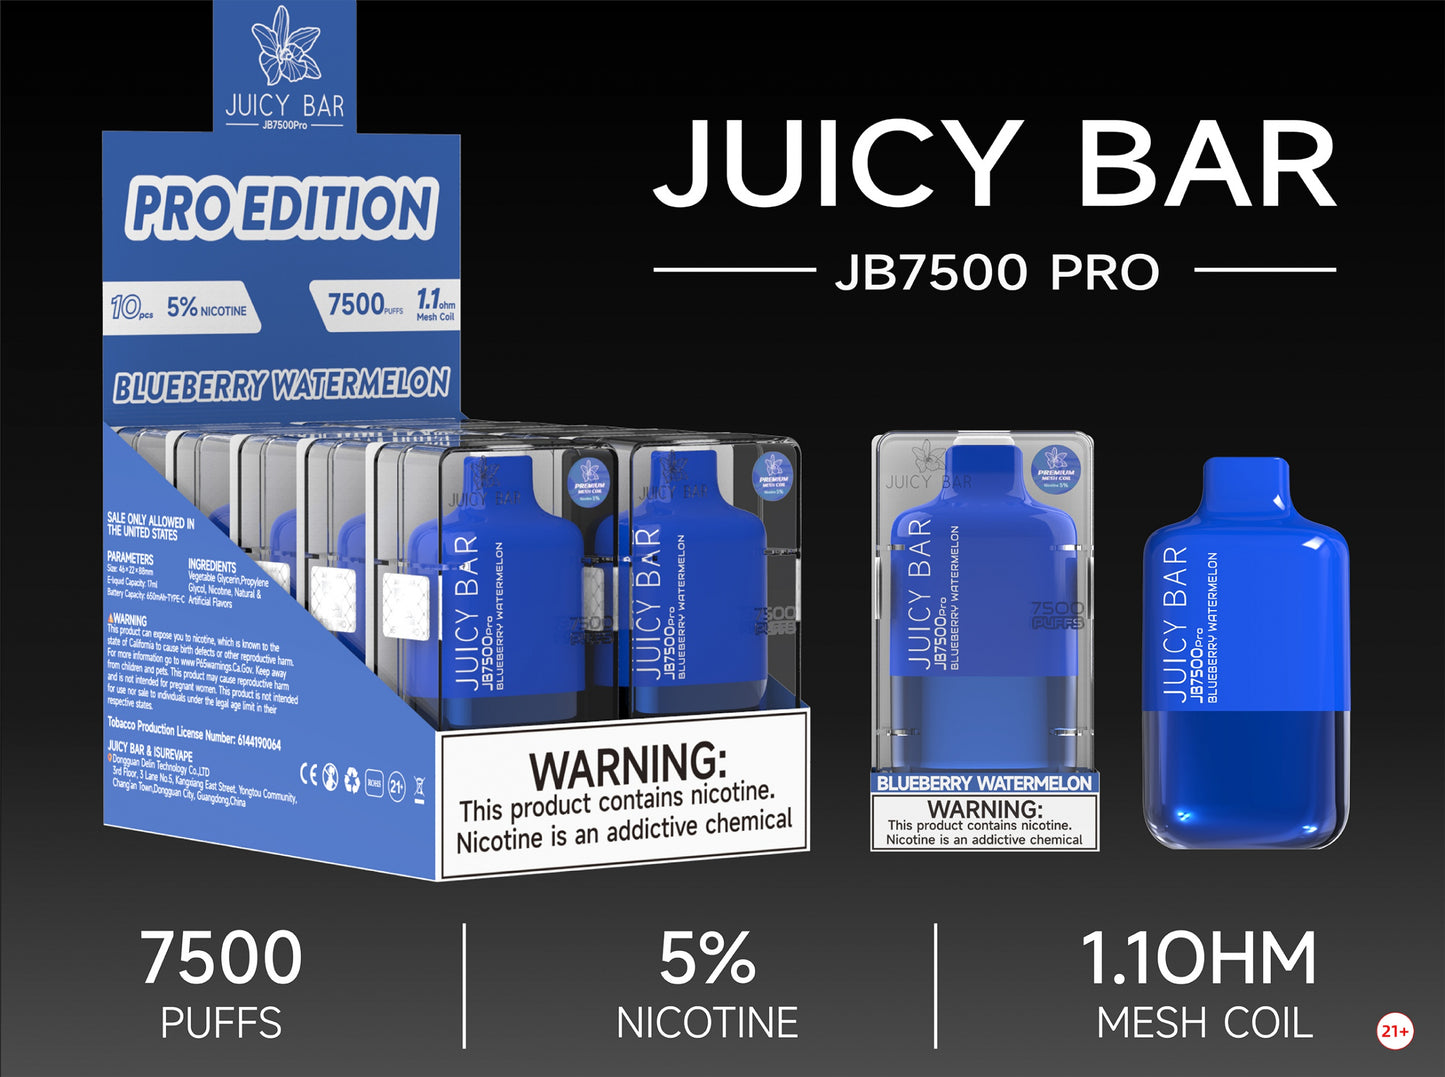 Juicy Bar Pro Edition 7500 Puffs 5% | Blueberry Watermelon with packaging